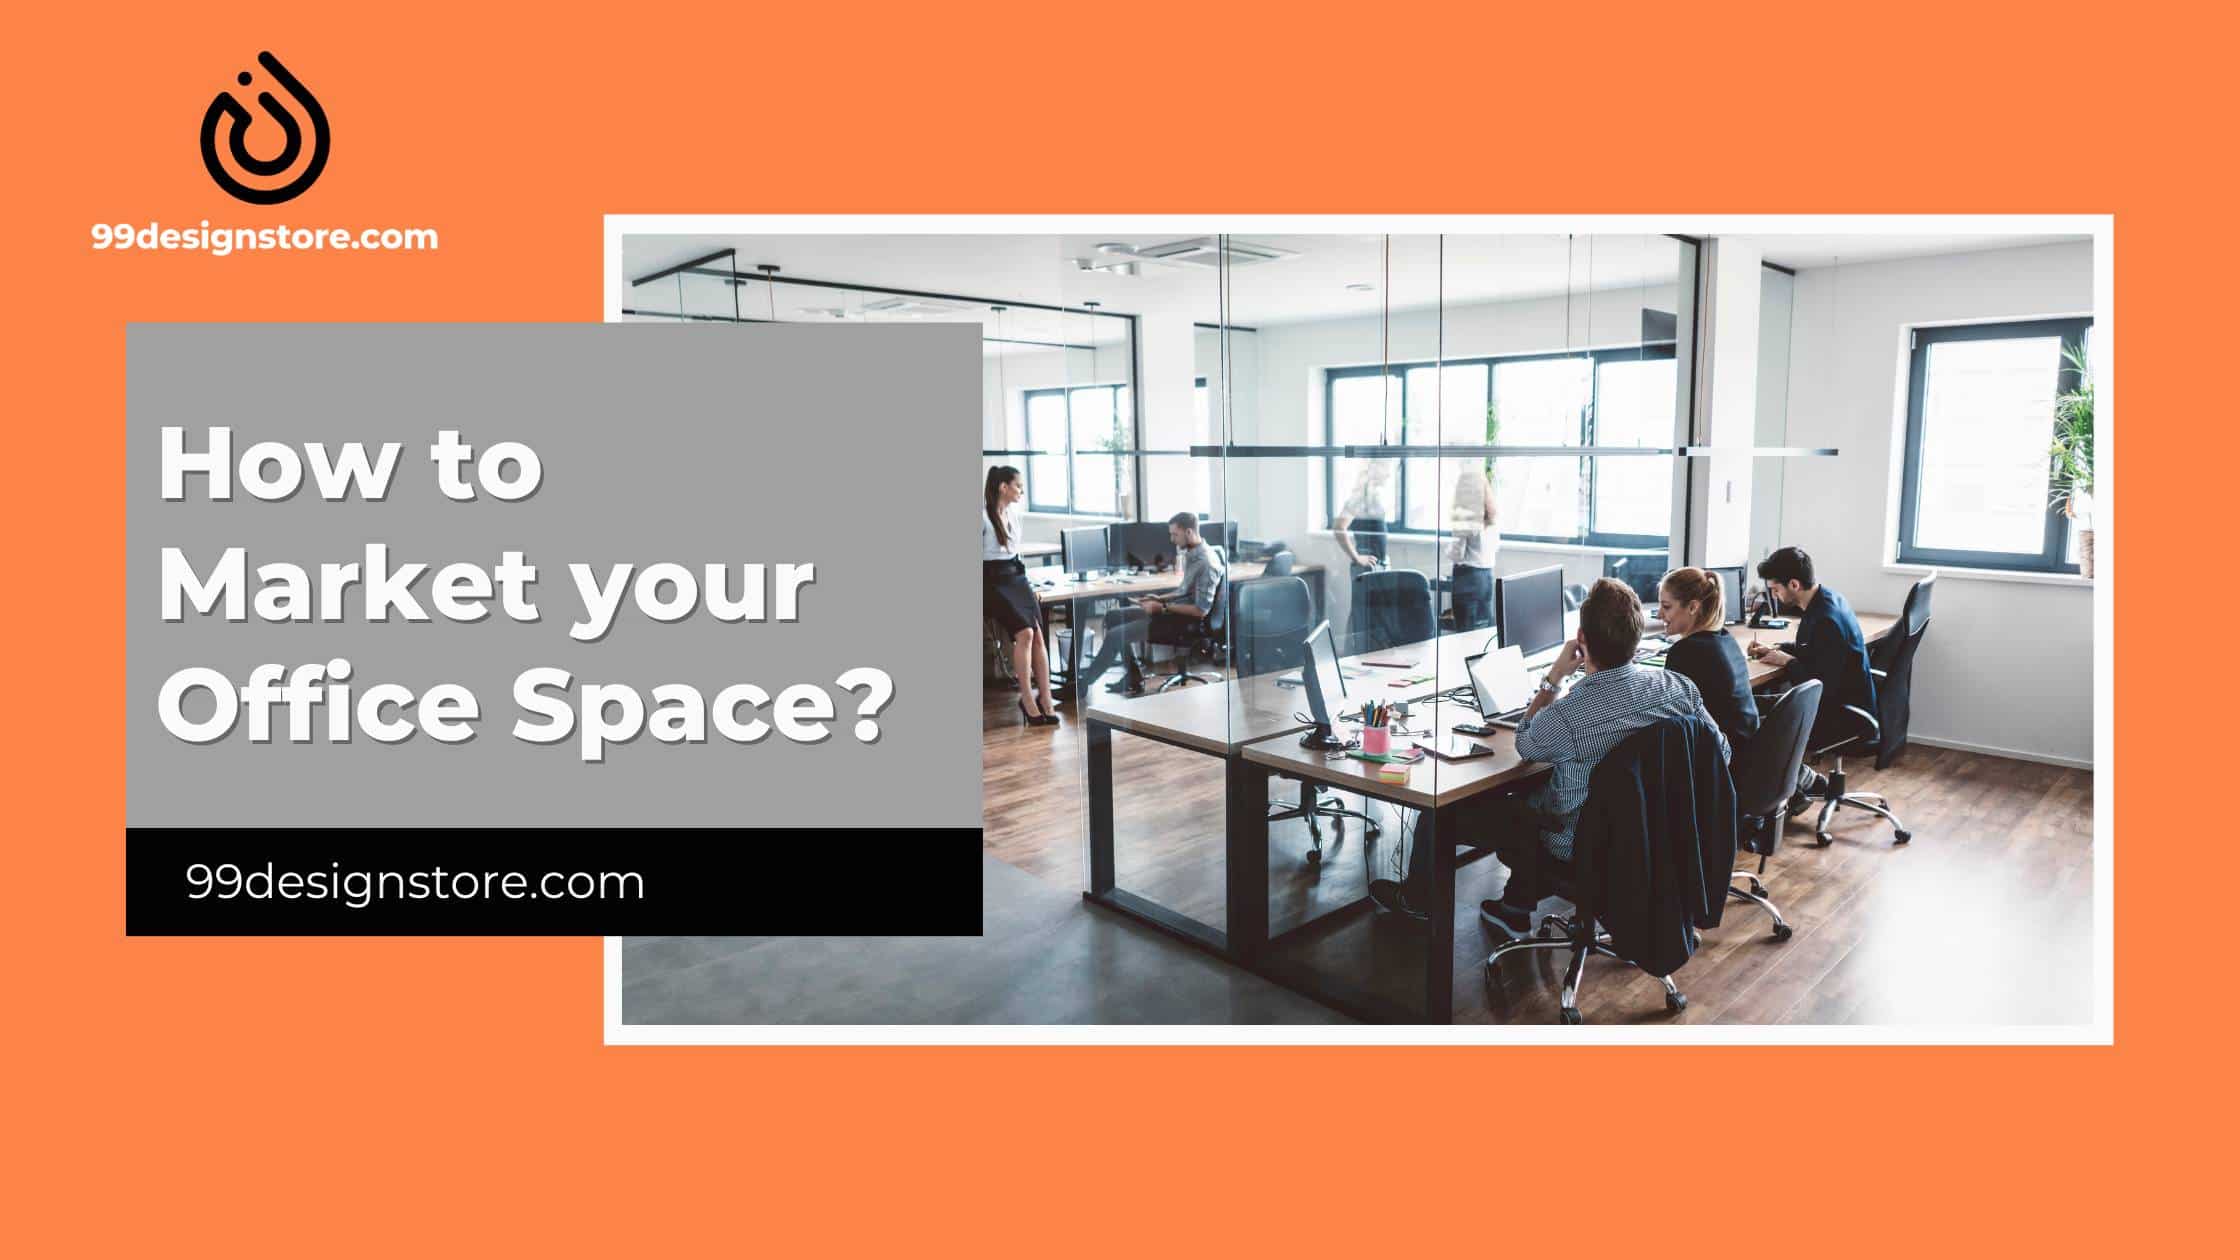 How to Market your Office Space